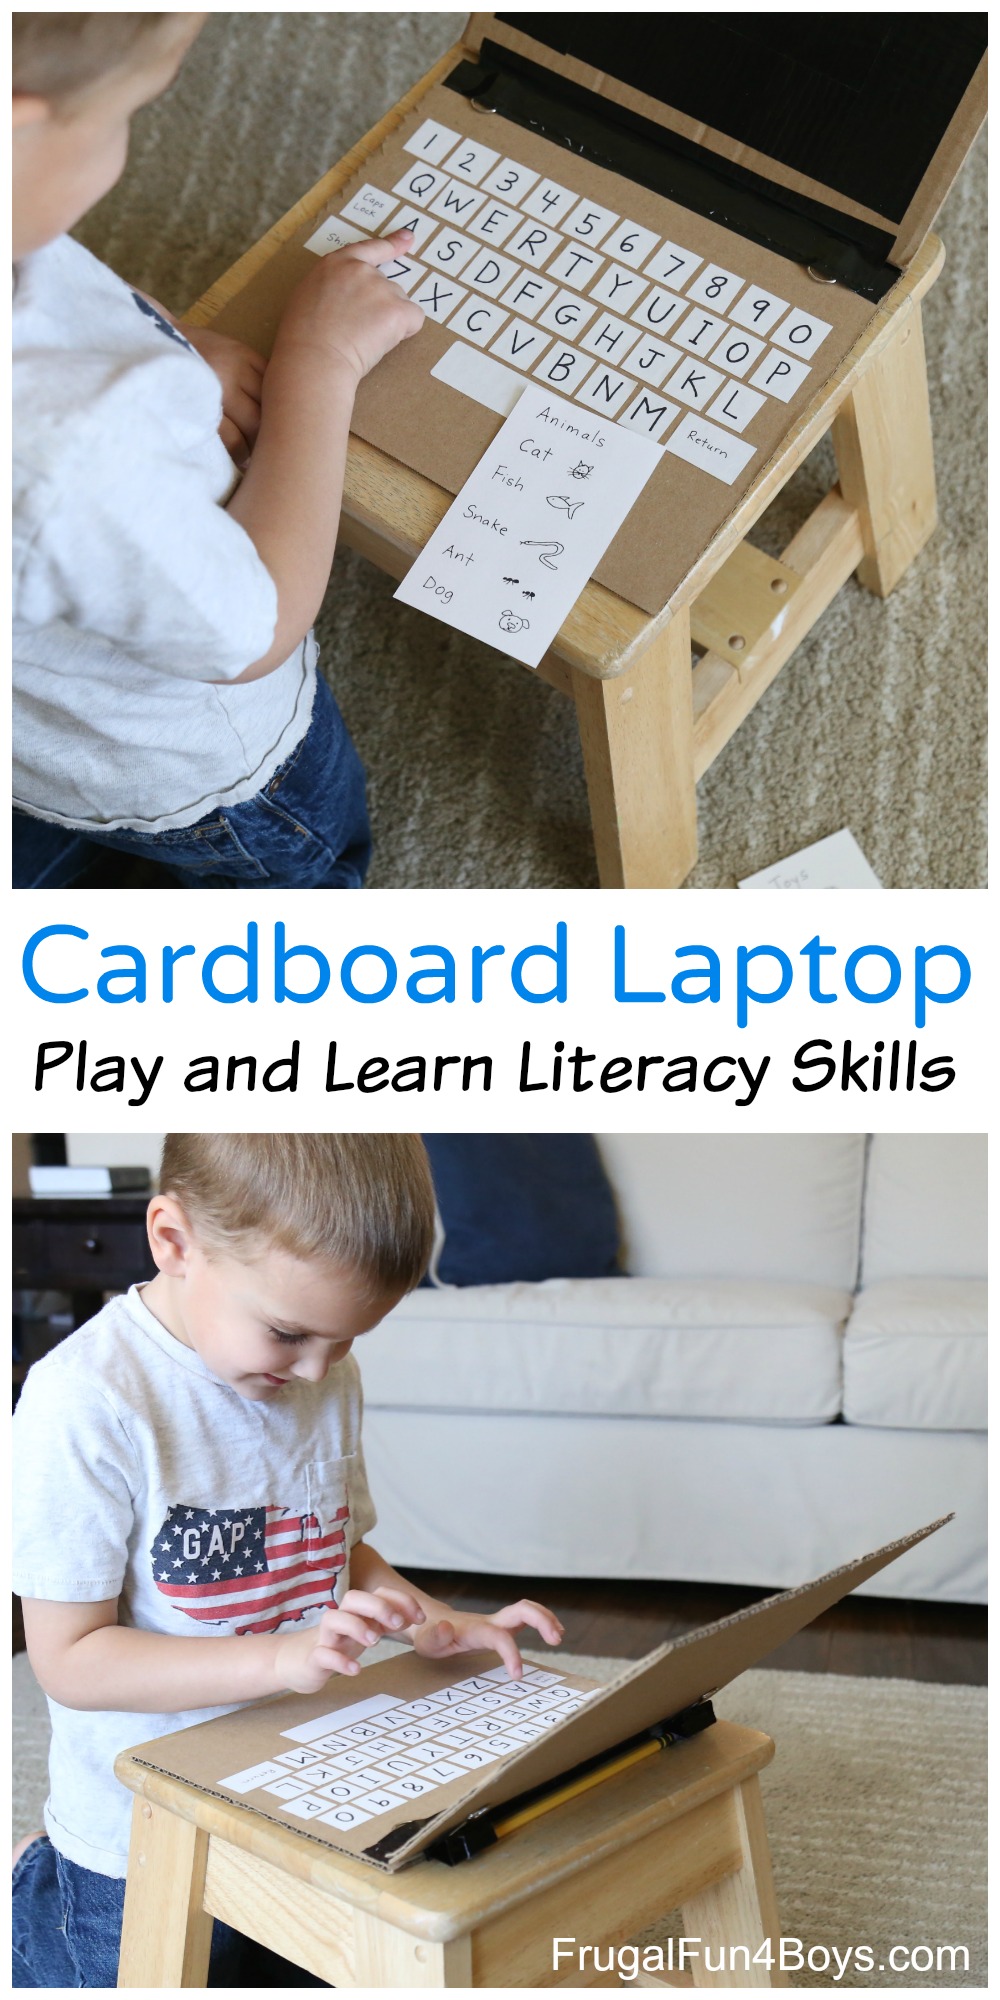 Cardboard Laptop - Play and Learn Literacy Skills!